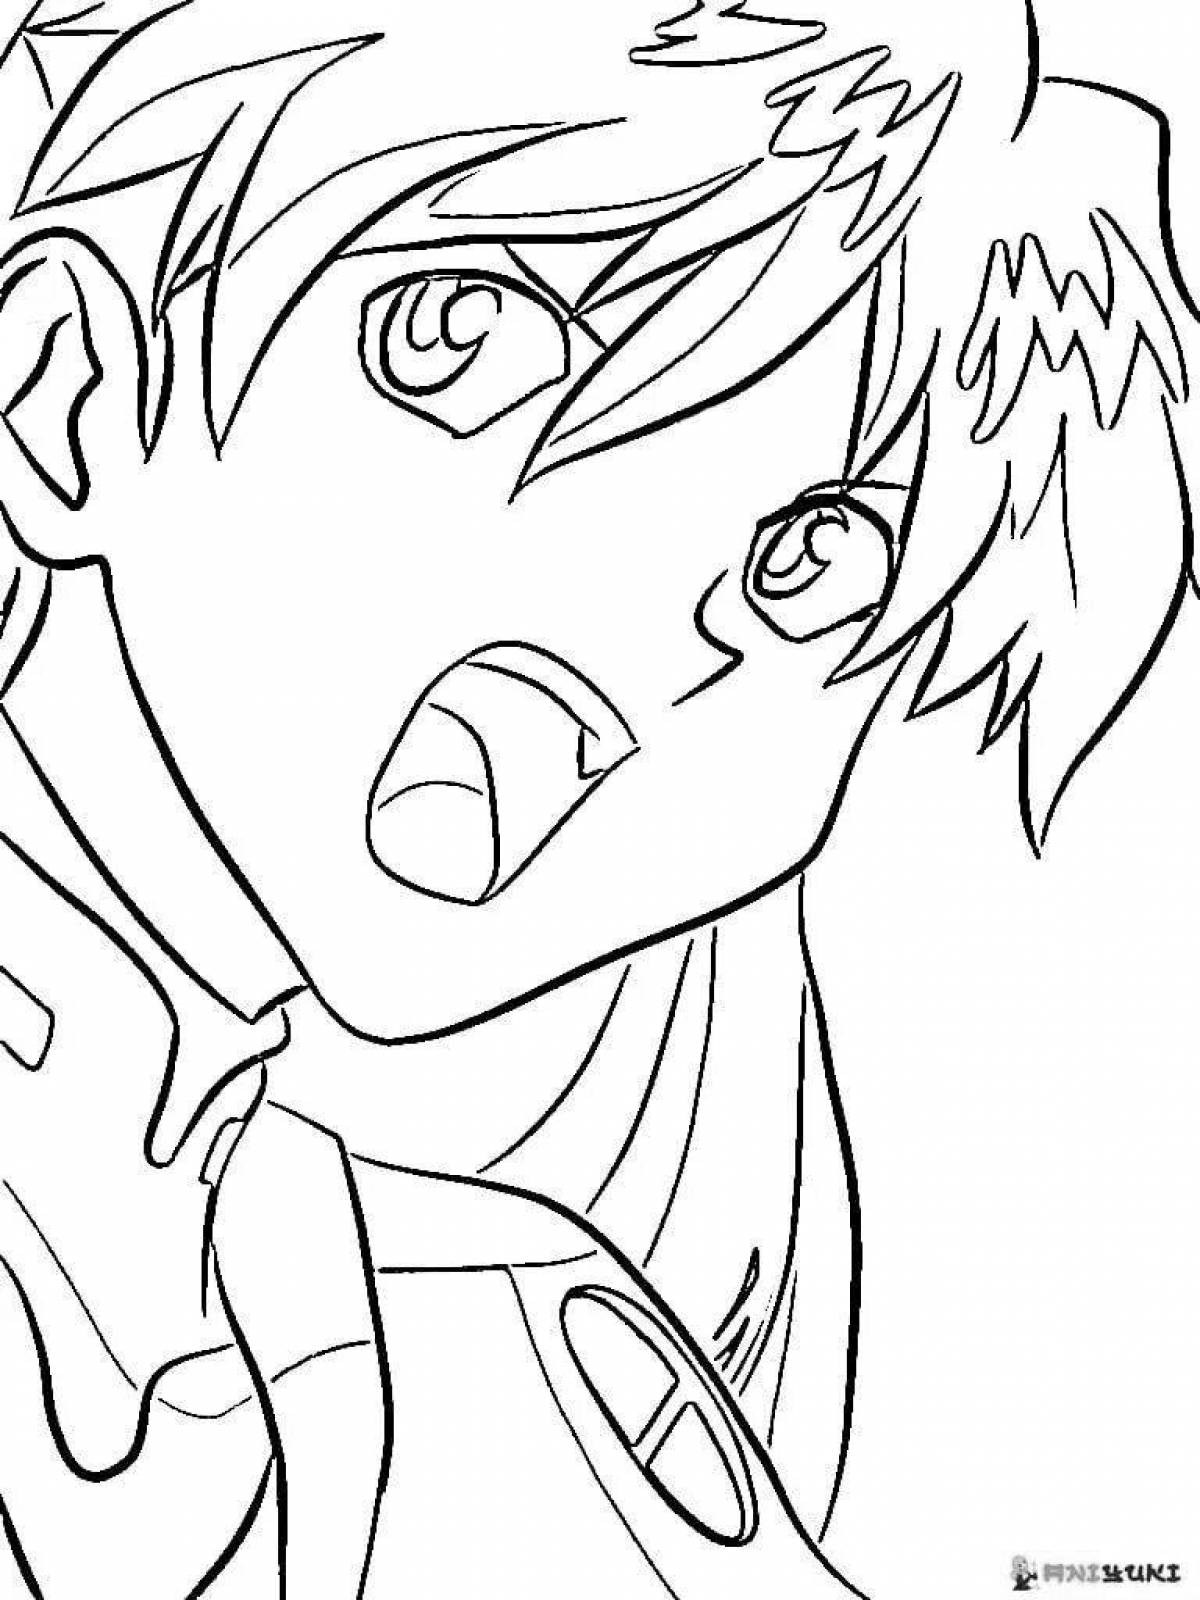 Great evangelion coloring book